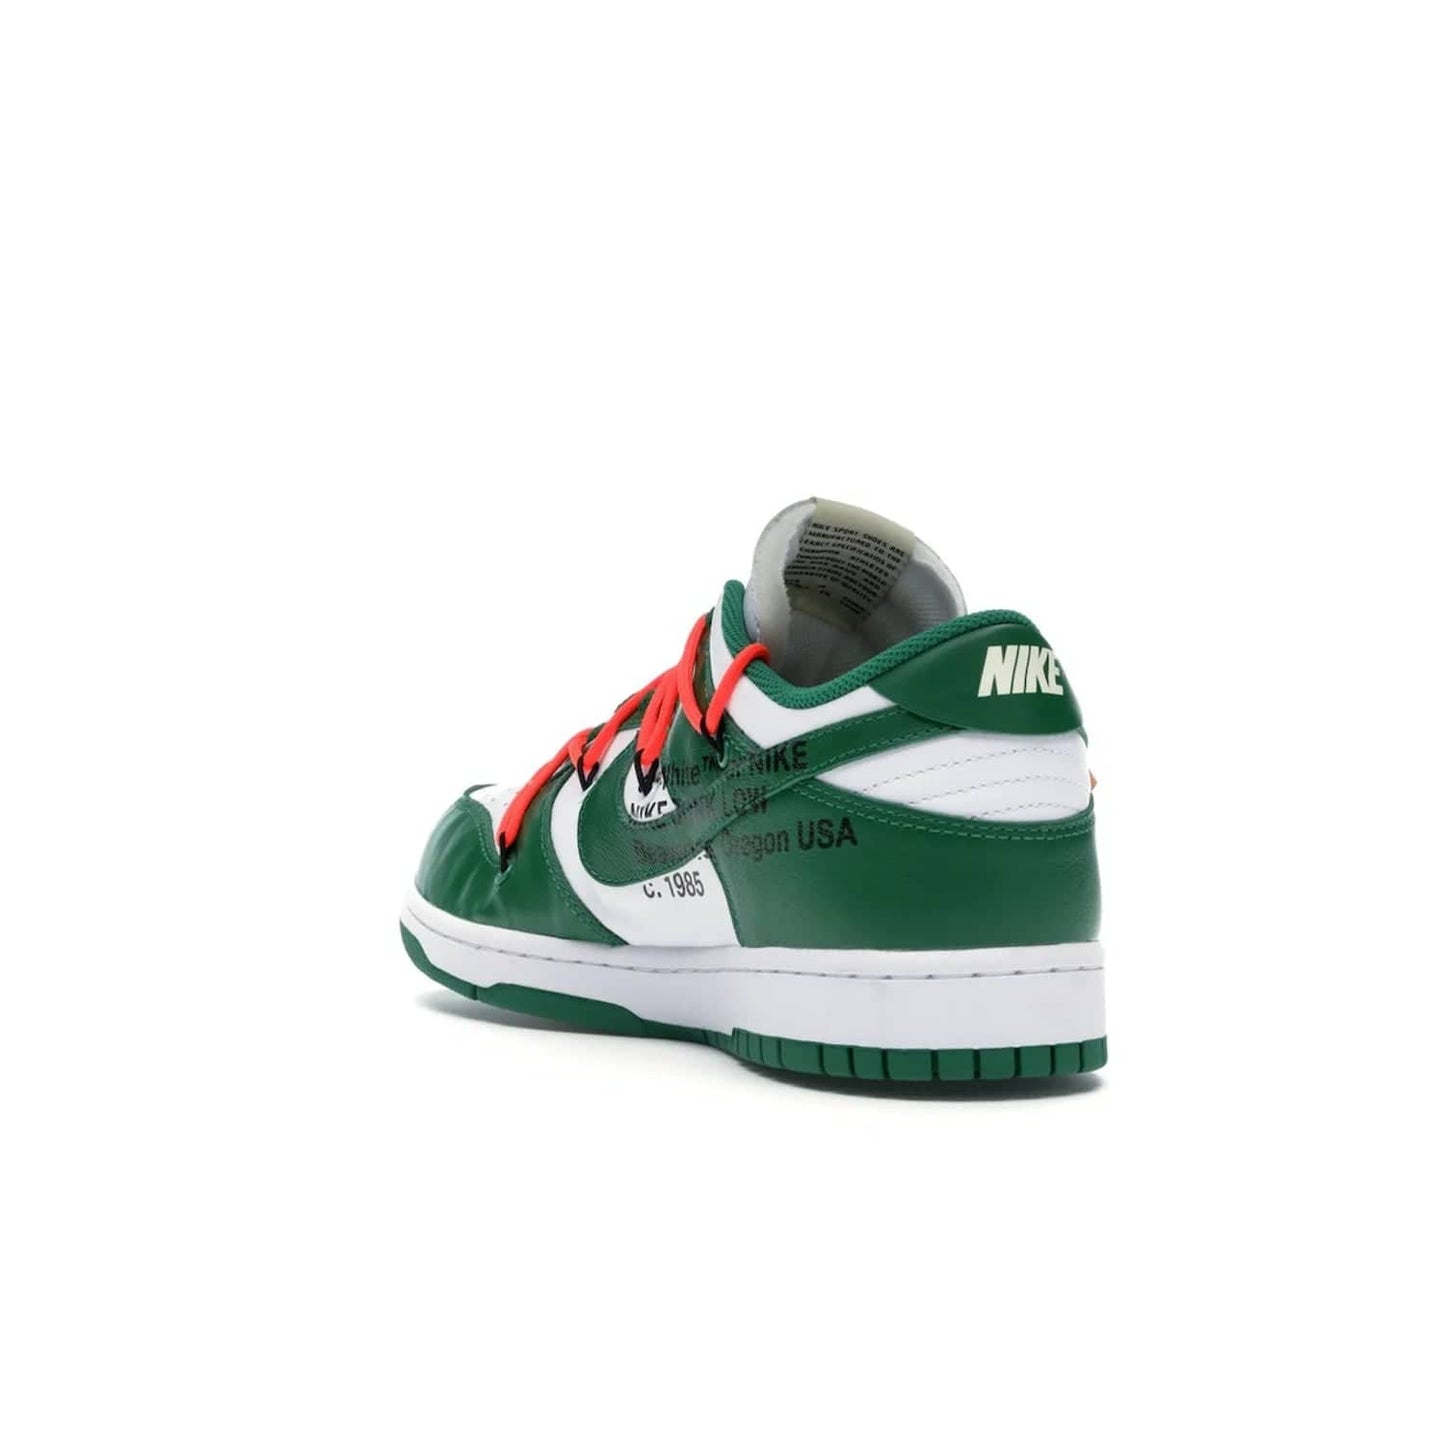 Nike Dunk Low Off-White Pine Green - Image 25 - Only at www.BallersClubKickz.com - The Nike Dunk Low Off-White Pine Green combines classic 1980s style with modern-day design. Featuring white leather uppers and pine green overlays, these classic kicks feature secondary lacing system, zip-ties and signature Off-White text. Releasing in December 2019, these shoes are a timeless classic for any wardrobe.